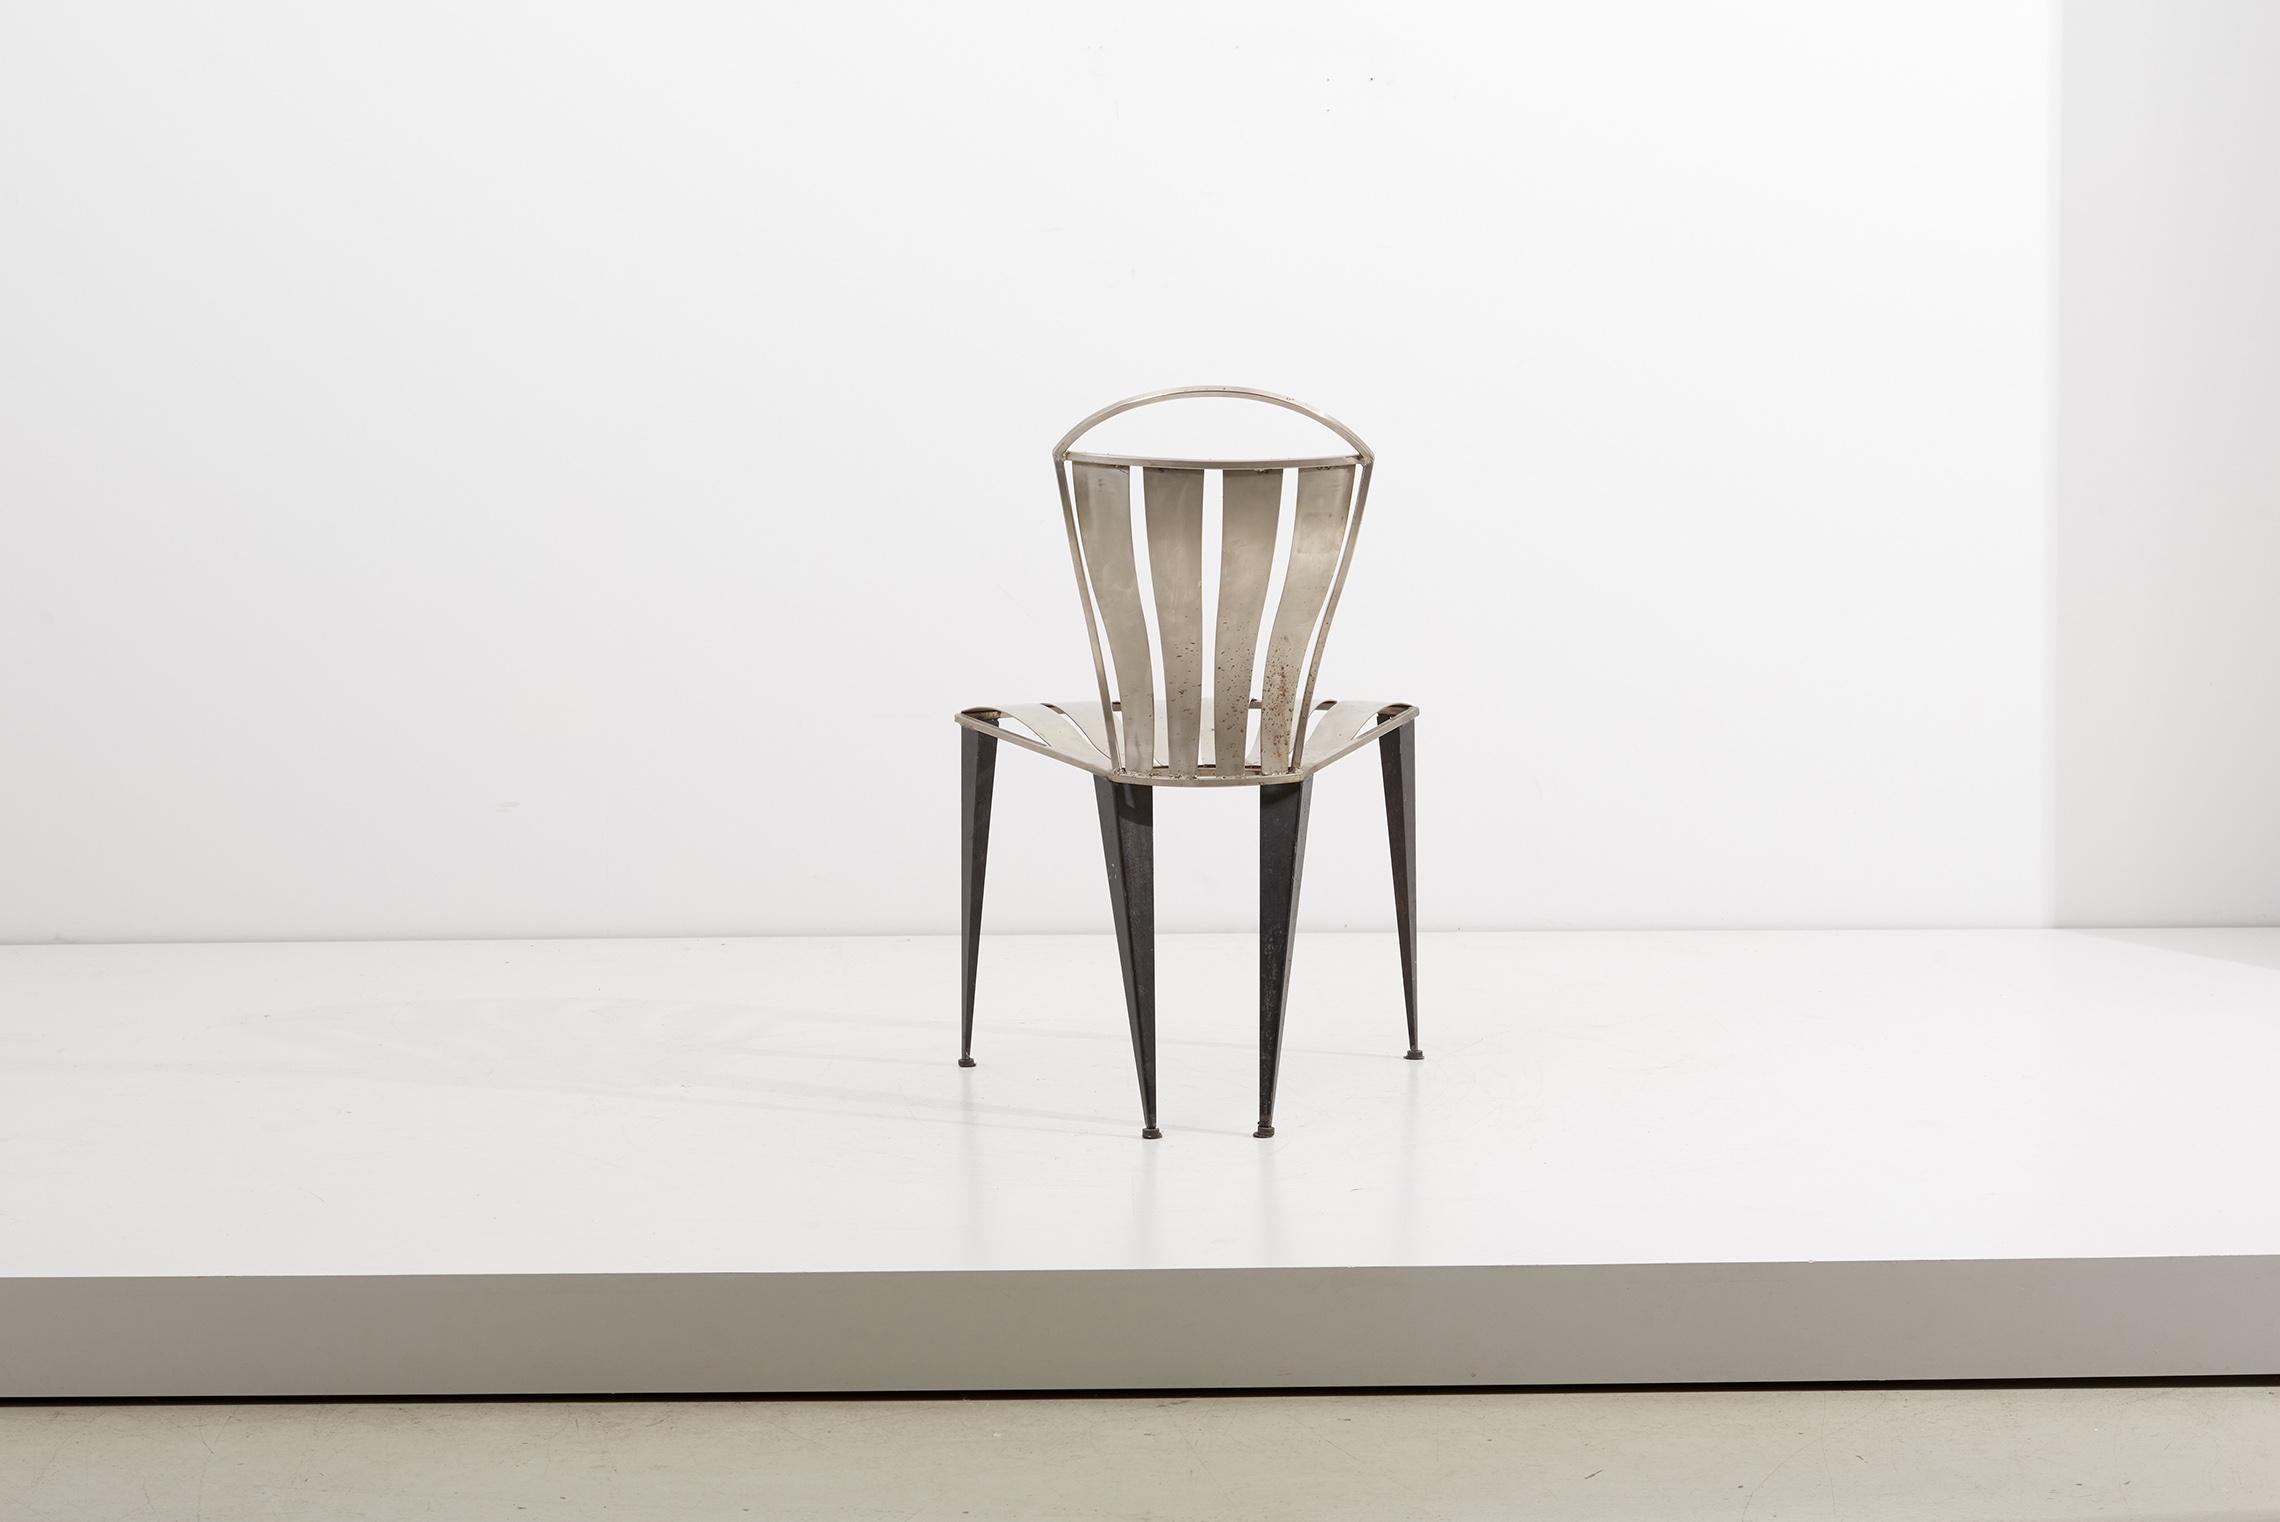 Late 20th Century Prototype Steel Chair by Tom Dixon, 1989 For Sale